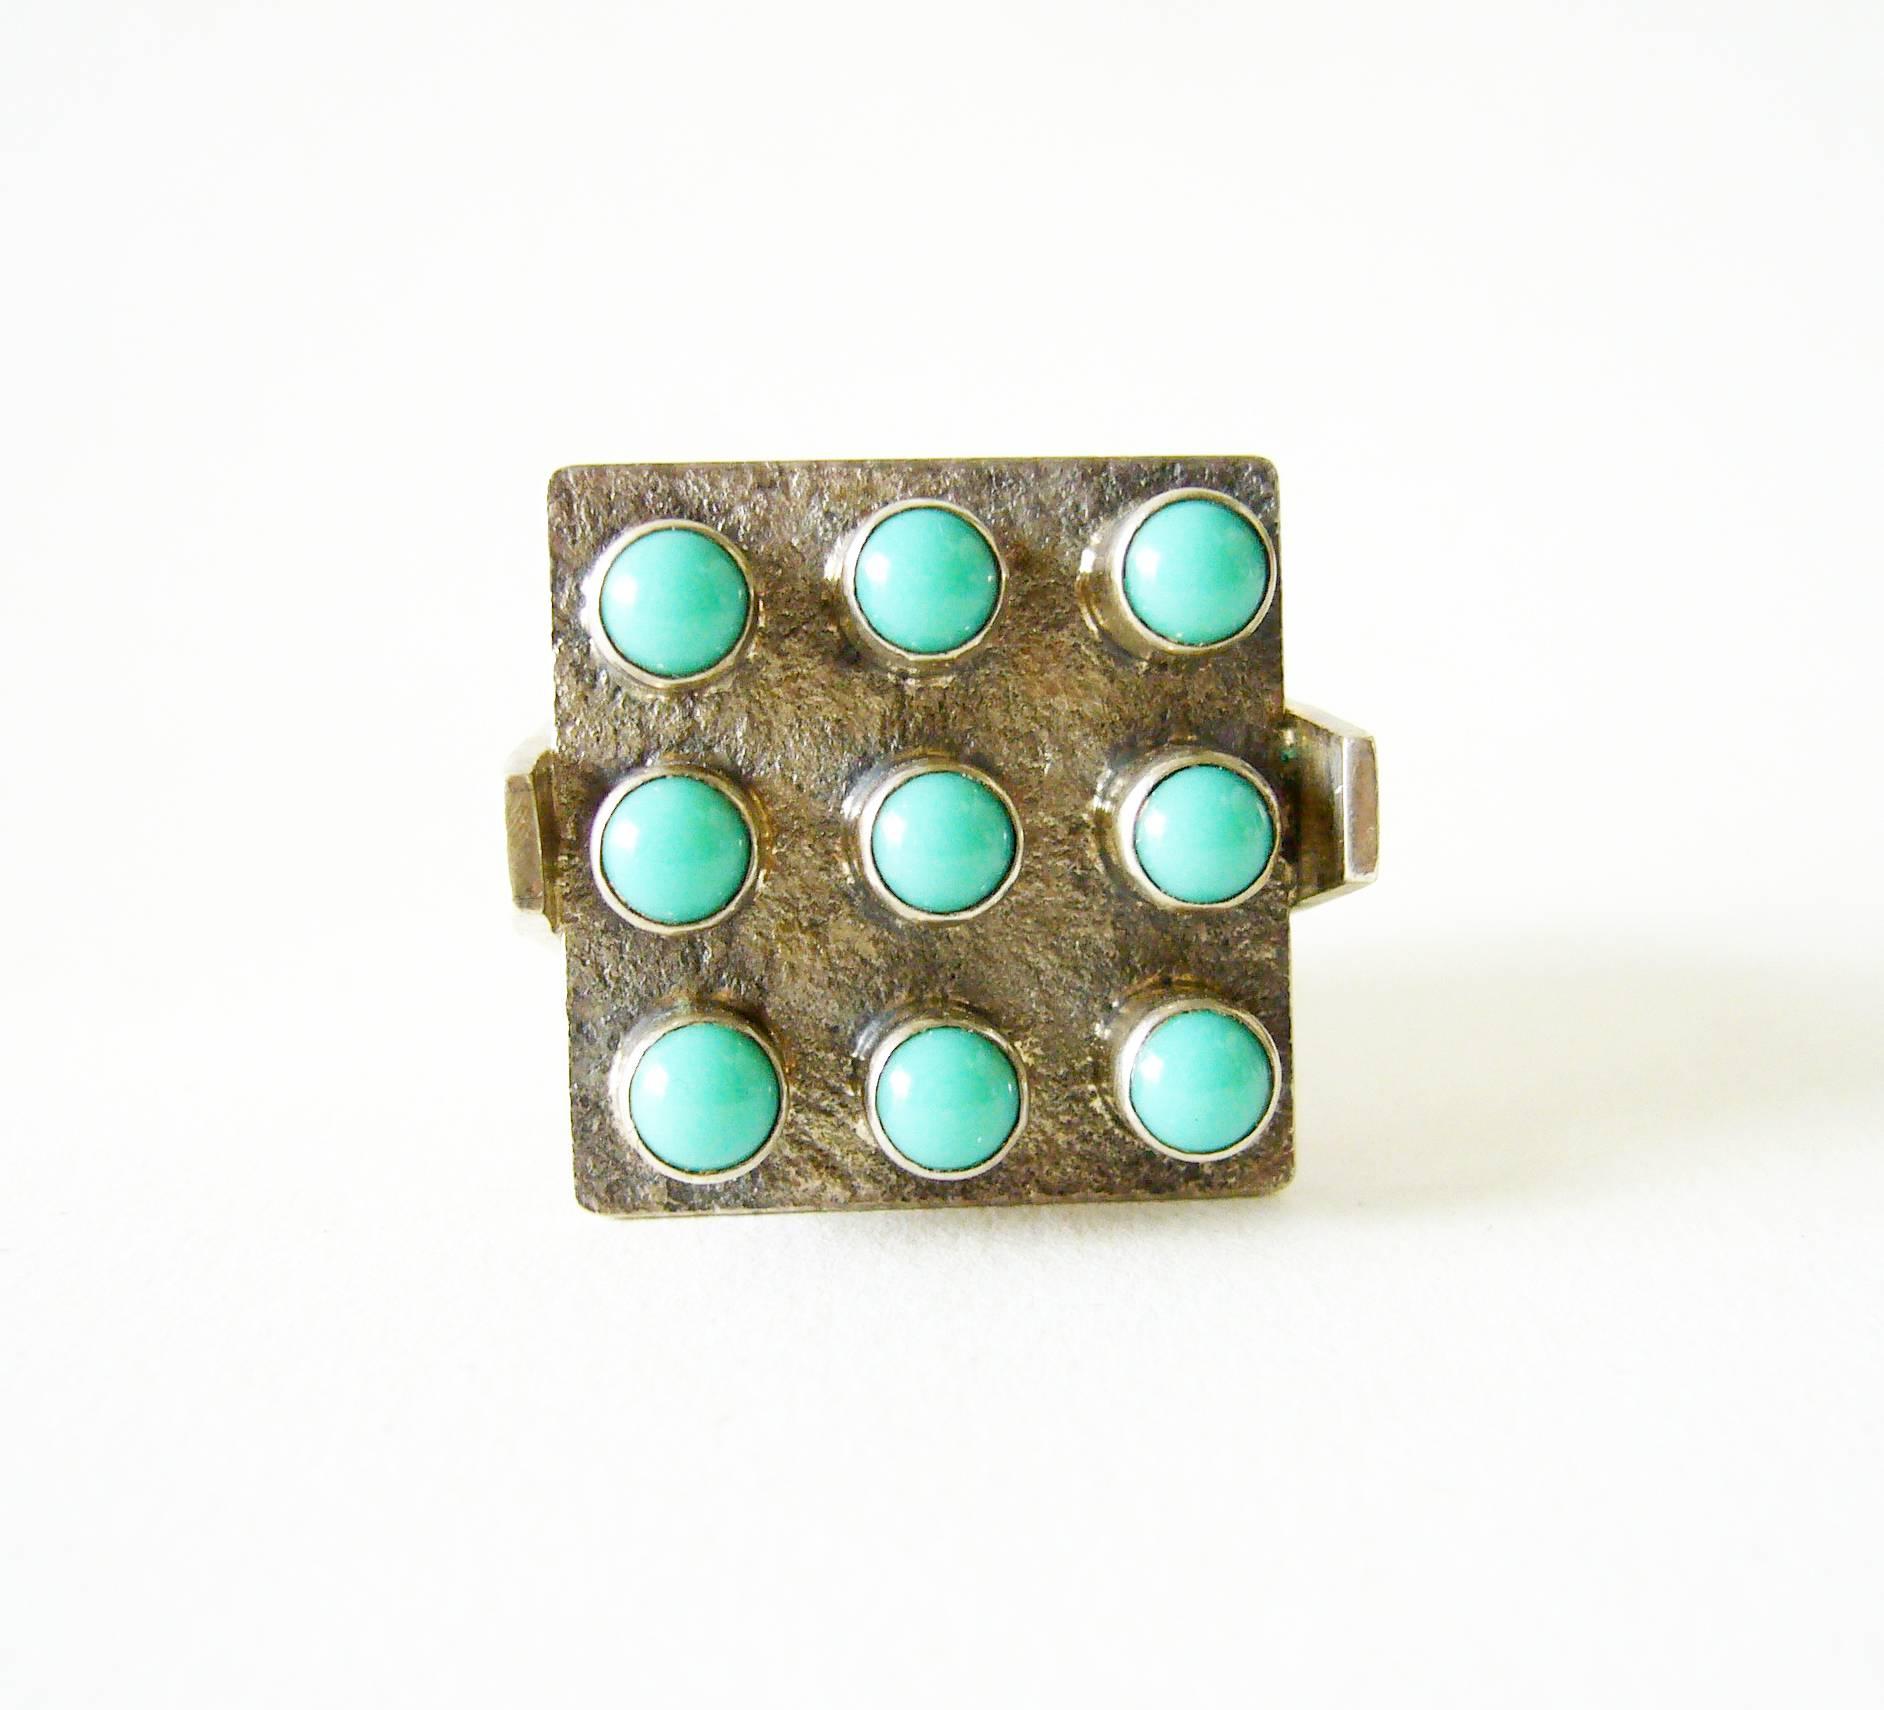 Silver and turquoise ring created by Master sculptor, painter and jeweler, Oswaldo Guayasamin of Ecuador.  Ring is a giner size 6 to 6.25.  Face of the ring measures 1